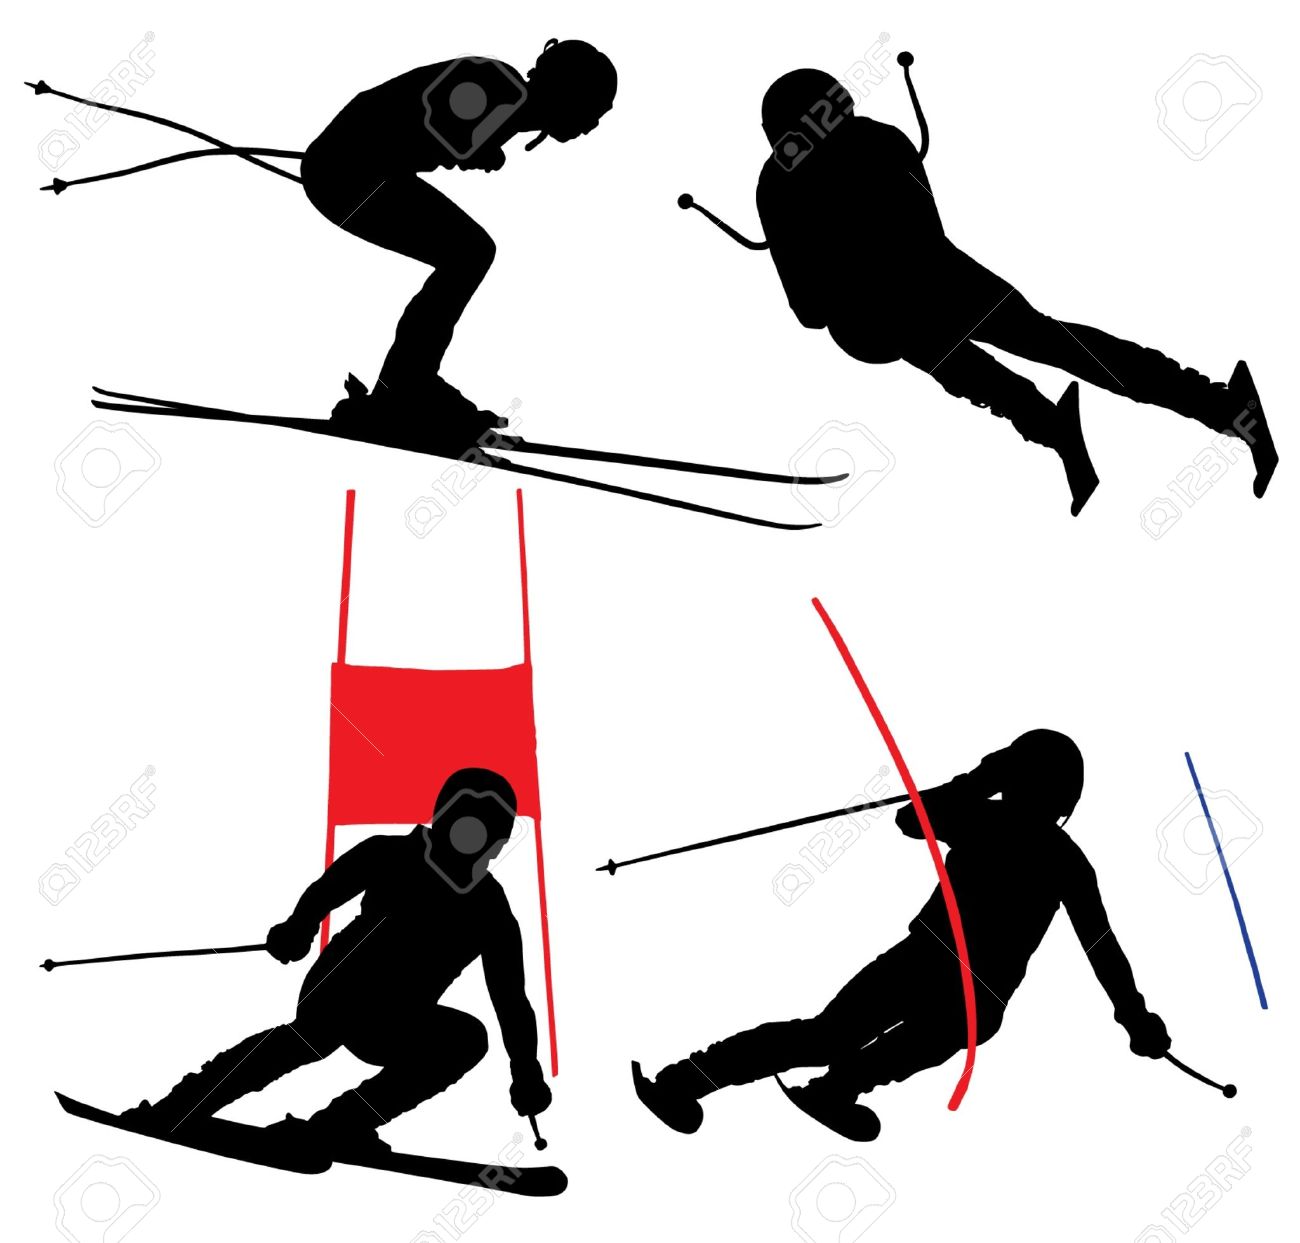 Alpine Skiing Silhouette On White Background Royalty Free Cliparts.